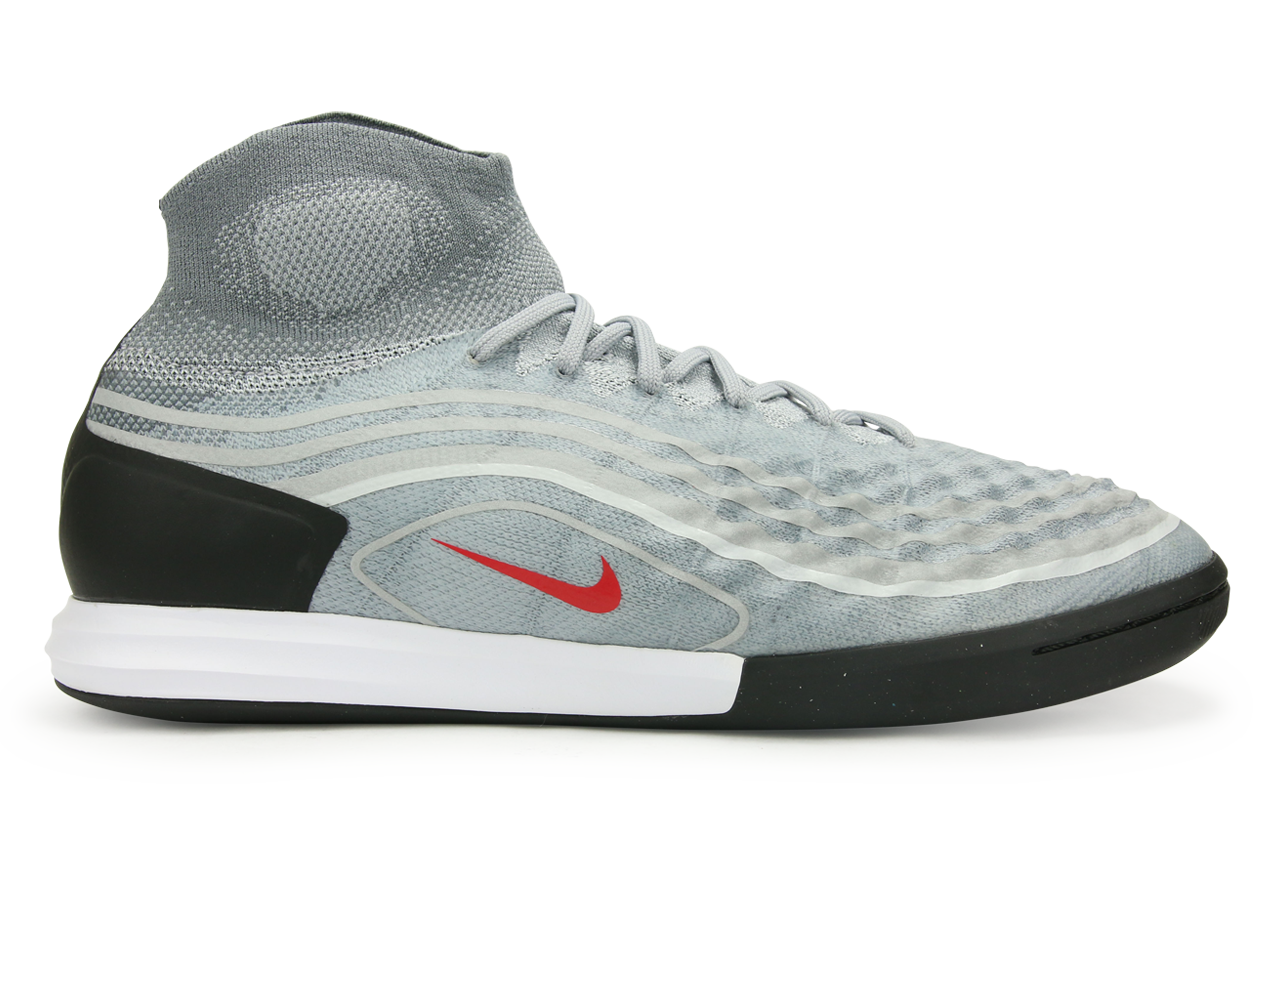 Nike Men's MagistaX Proximo II Dynamic Fit Indoor Soccer Shoes Cool Grey/Varsity Red/Black/Wolf Grey